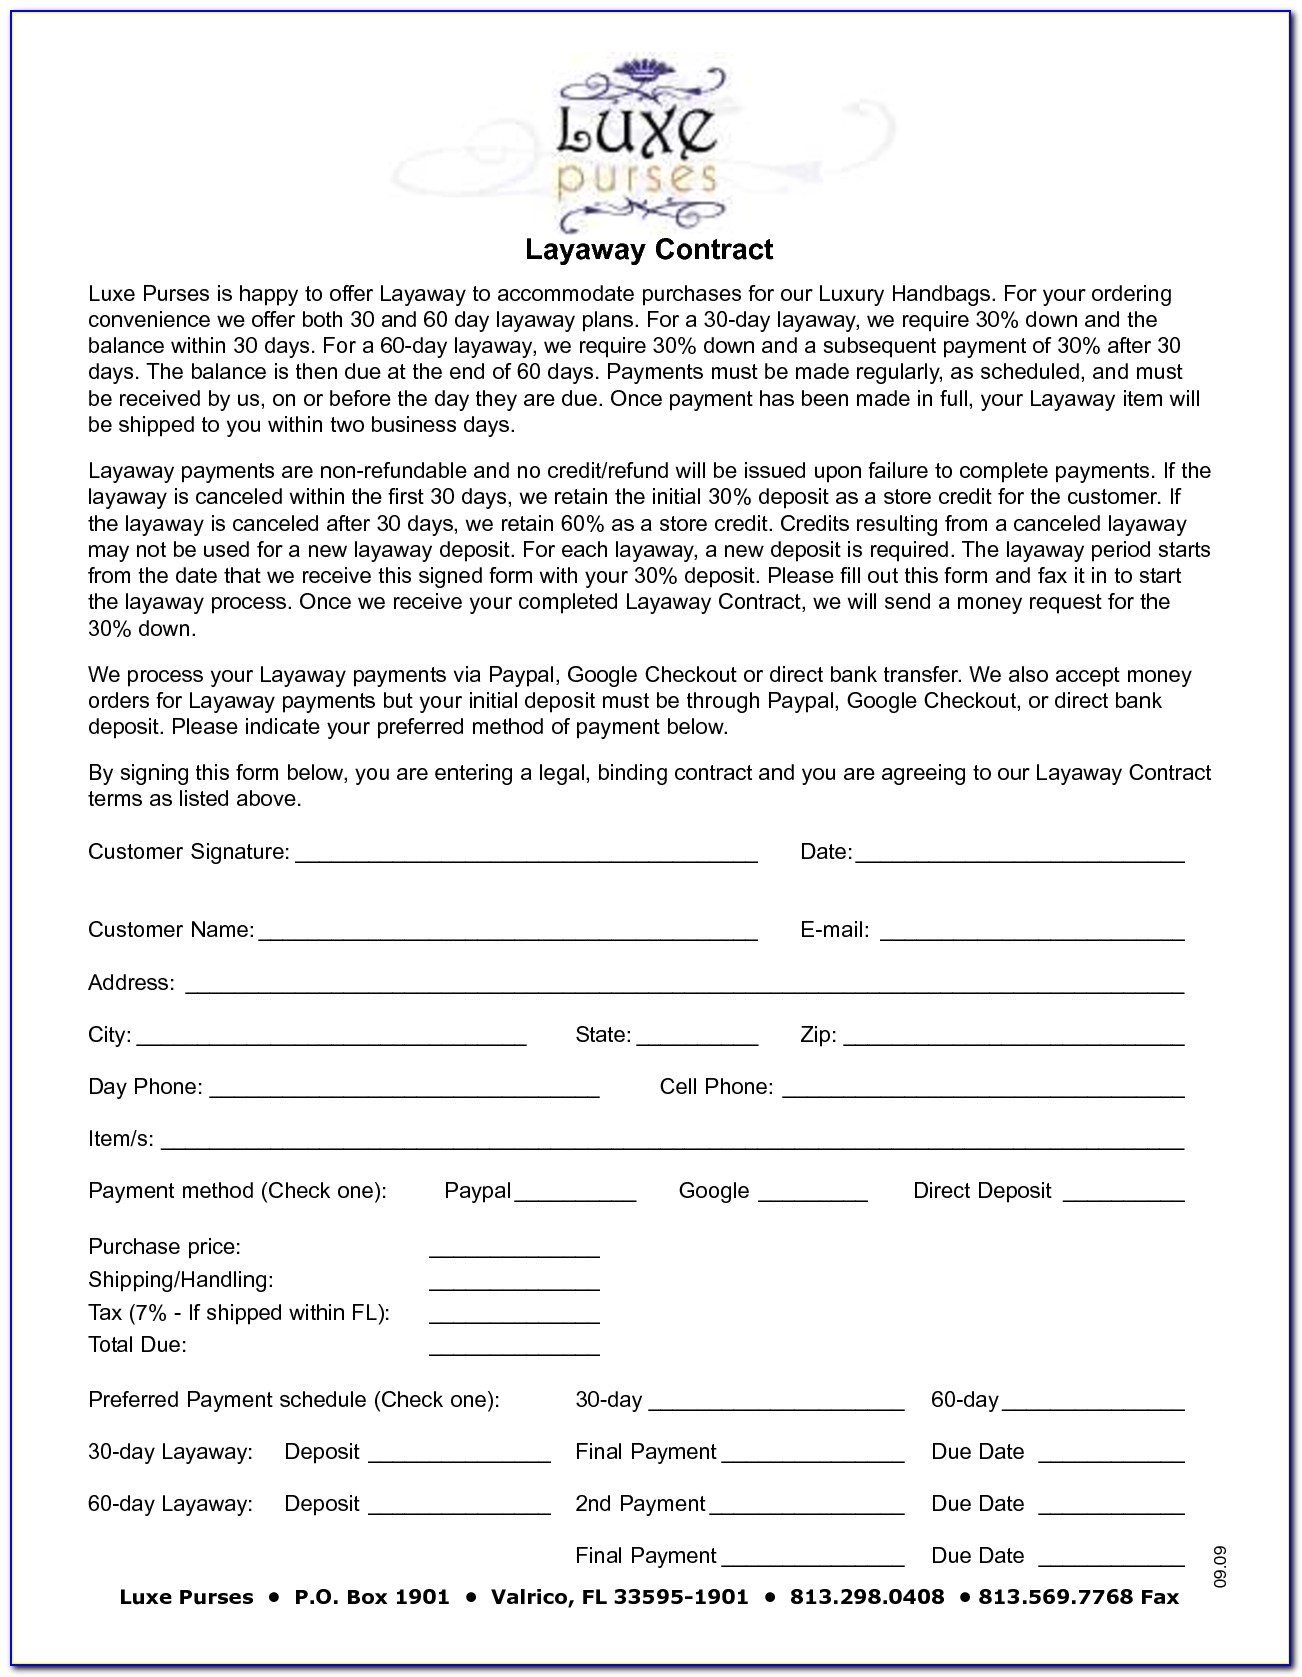 Free Layaway Agreement Forms